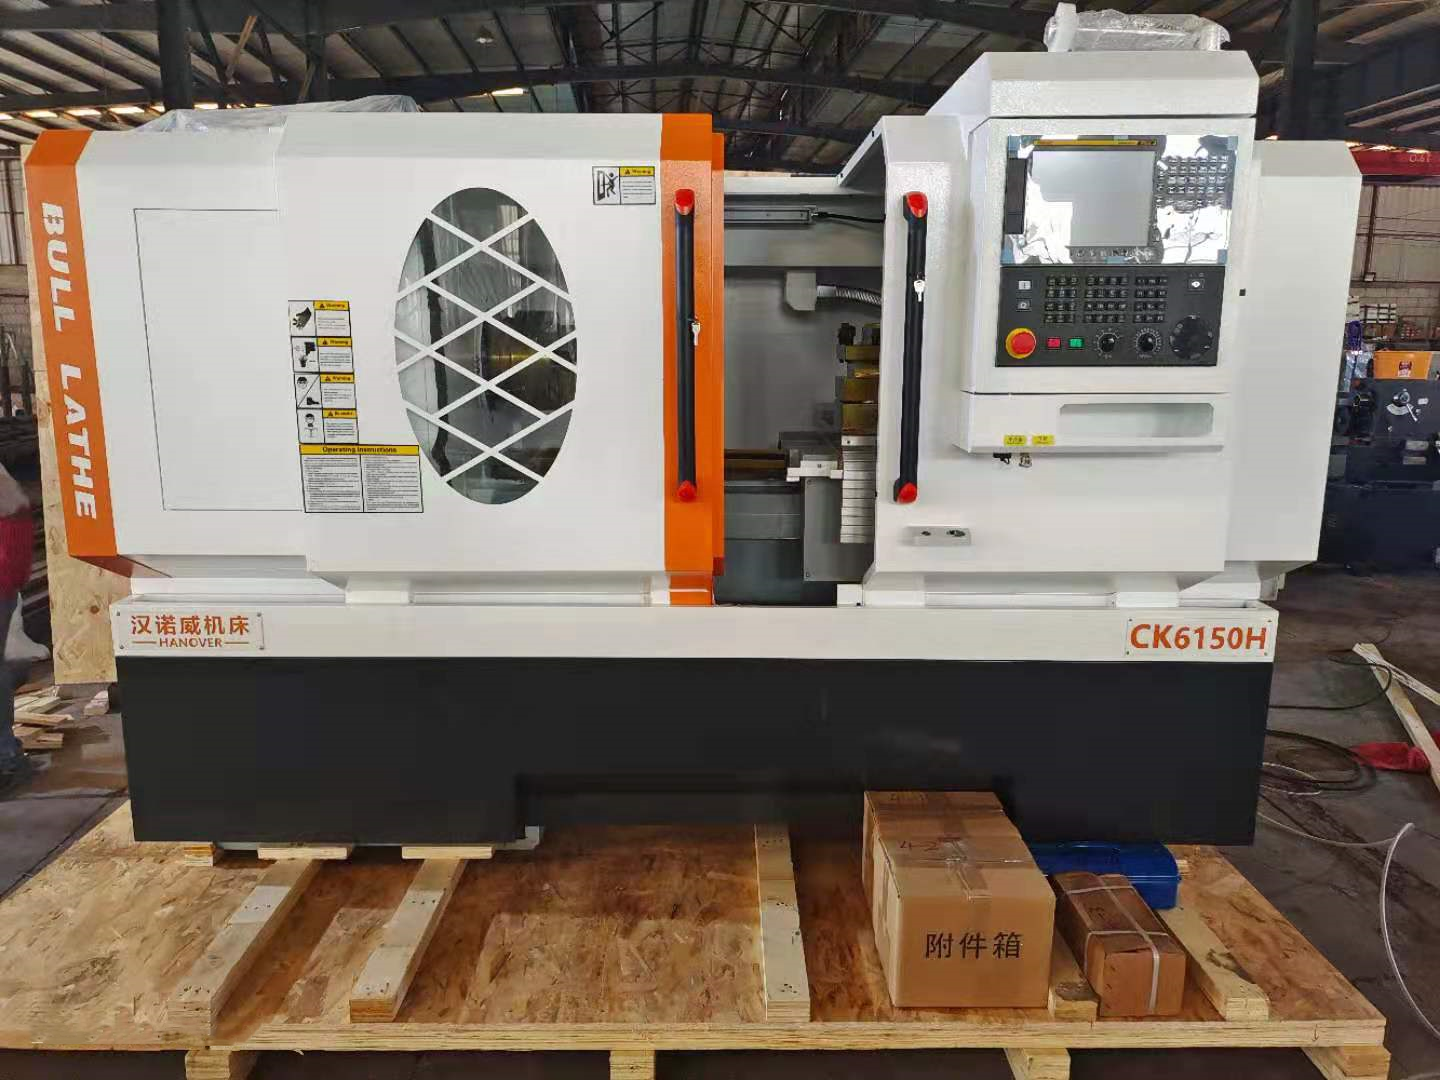 Our Company Has Recently Exported Two Multi Gear CNC Lathes​ To Russia